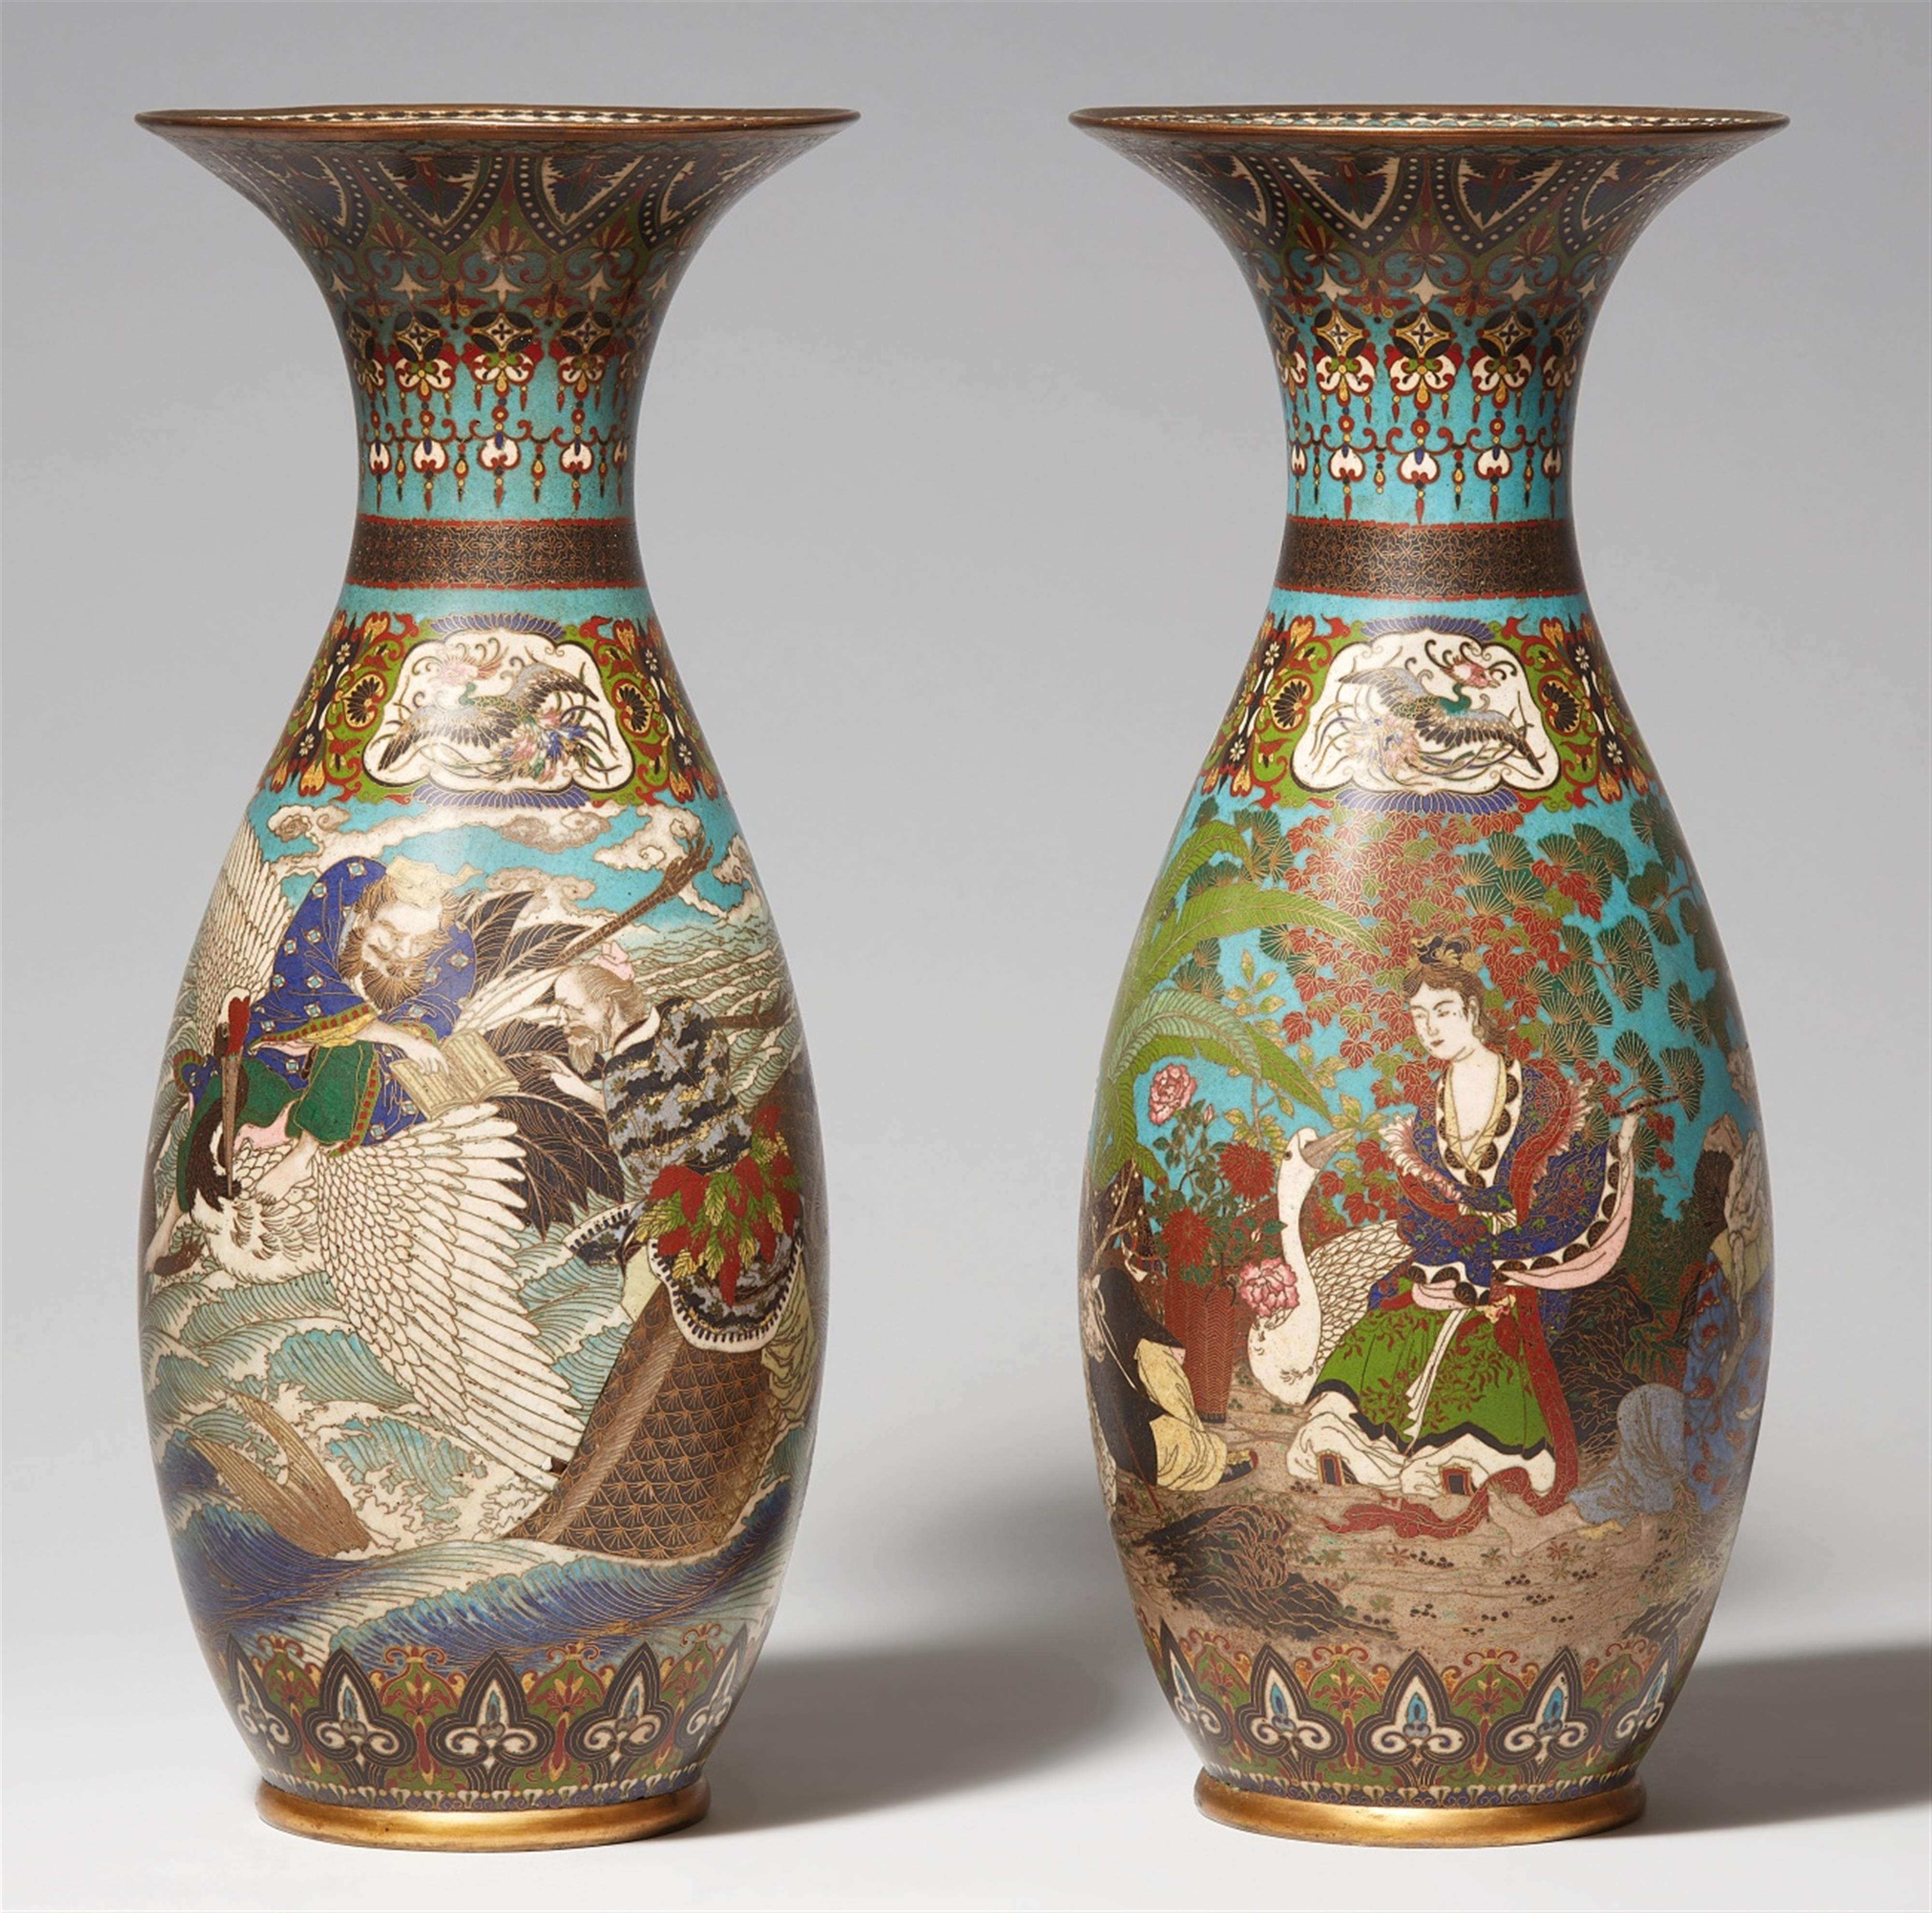 A pair of large cloisonné vases. Late 19th century - image-1